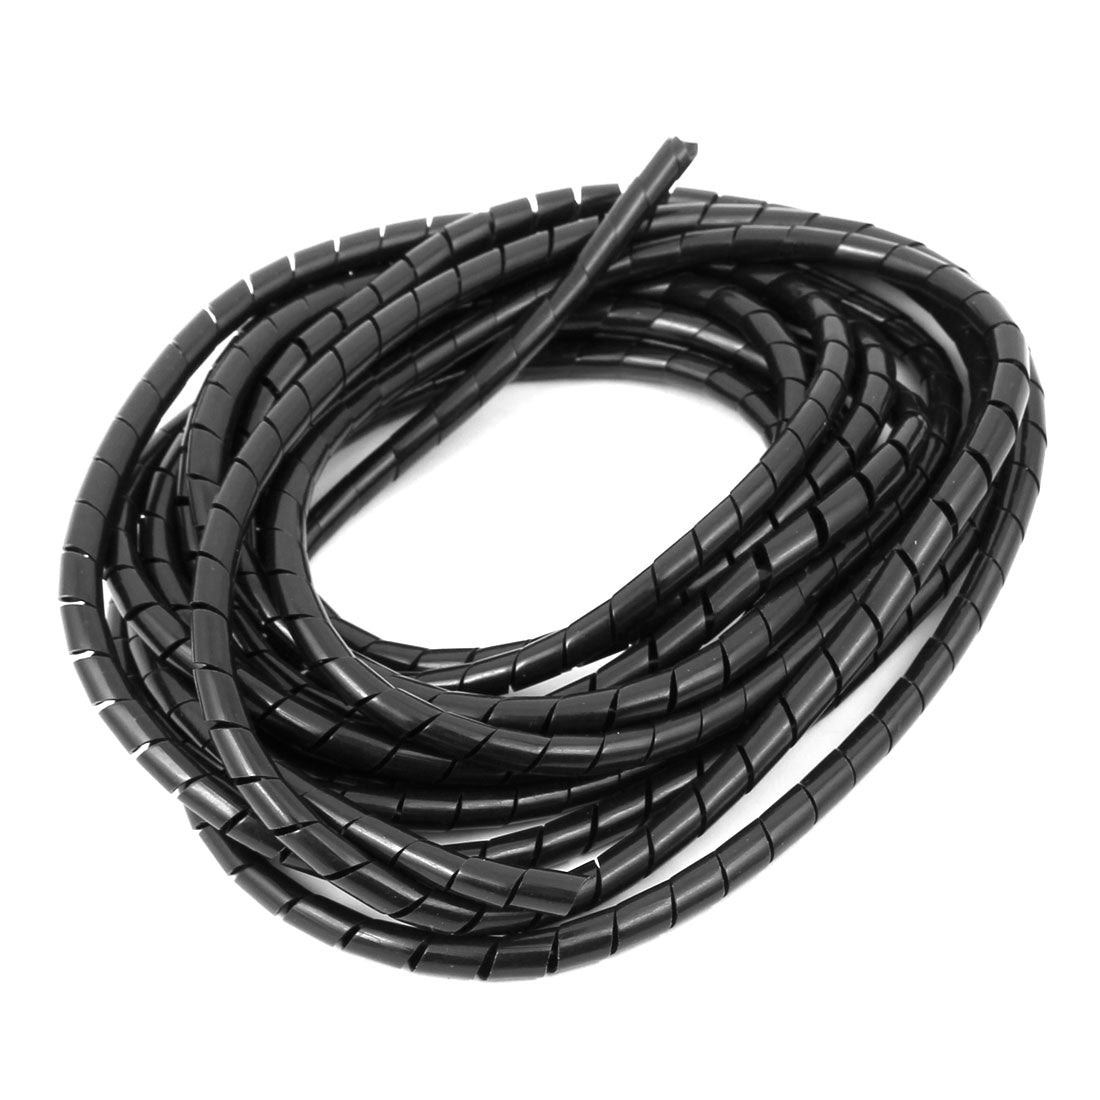 uxcell Uxcell 5mm Flexible Spiral Tube Cable Wire Wrap Computer Manage Cord Black 4 Meter